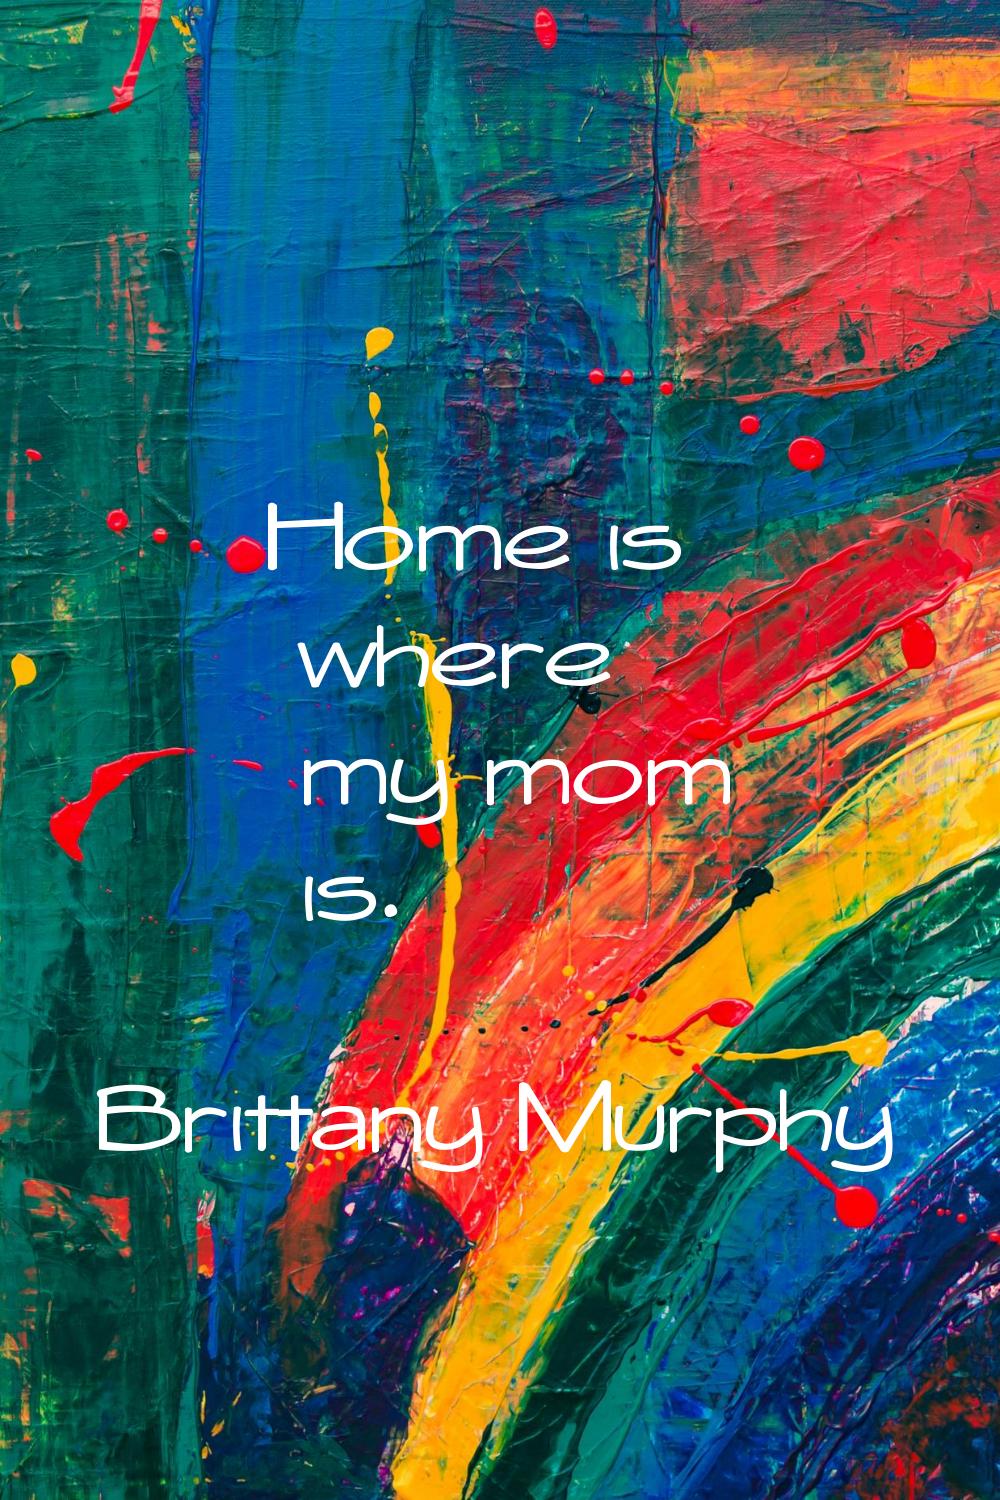 Home is where my mom is.